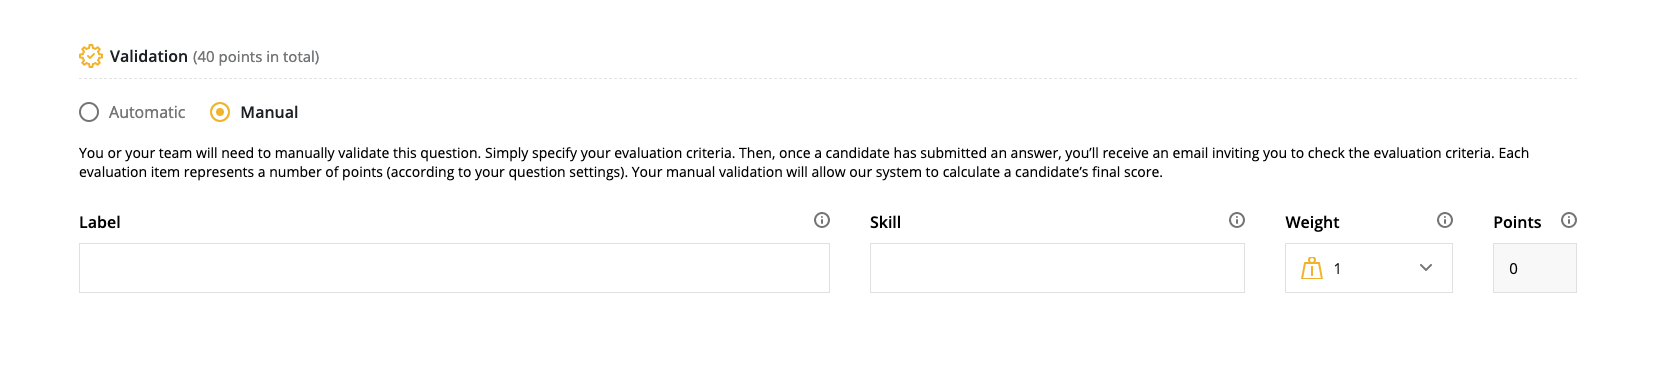 Validation section with "manual" option selected. The fields for label, skill, weight, and points are displayed.